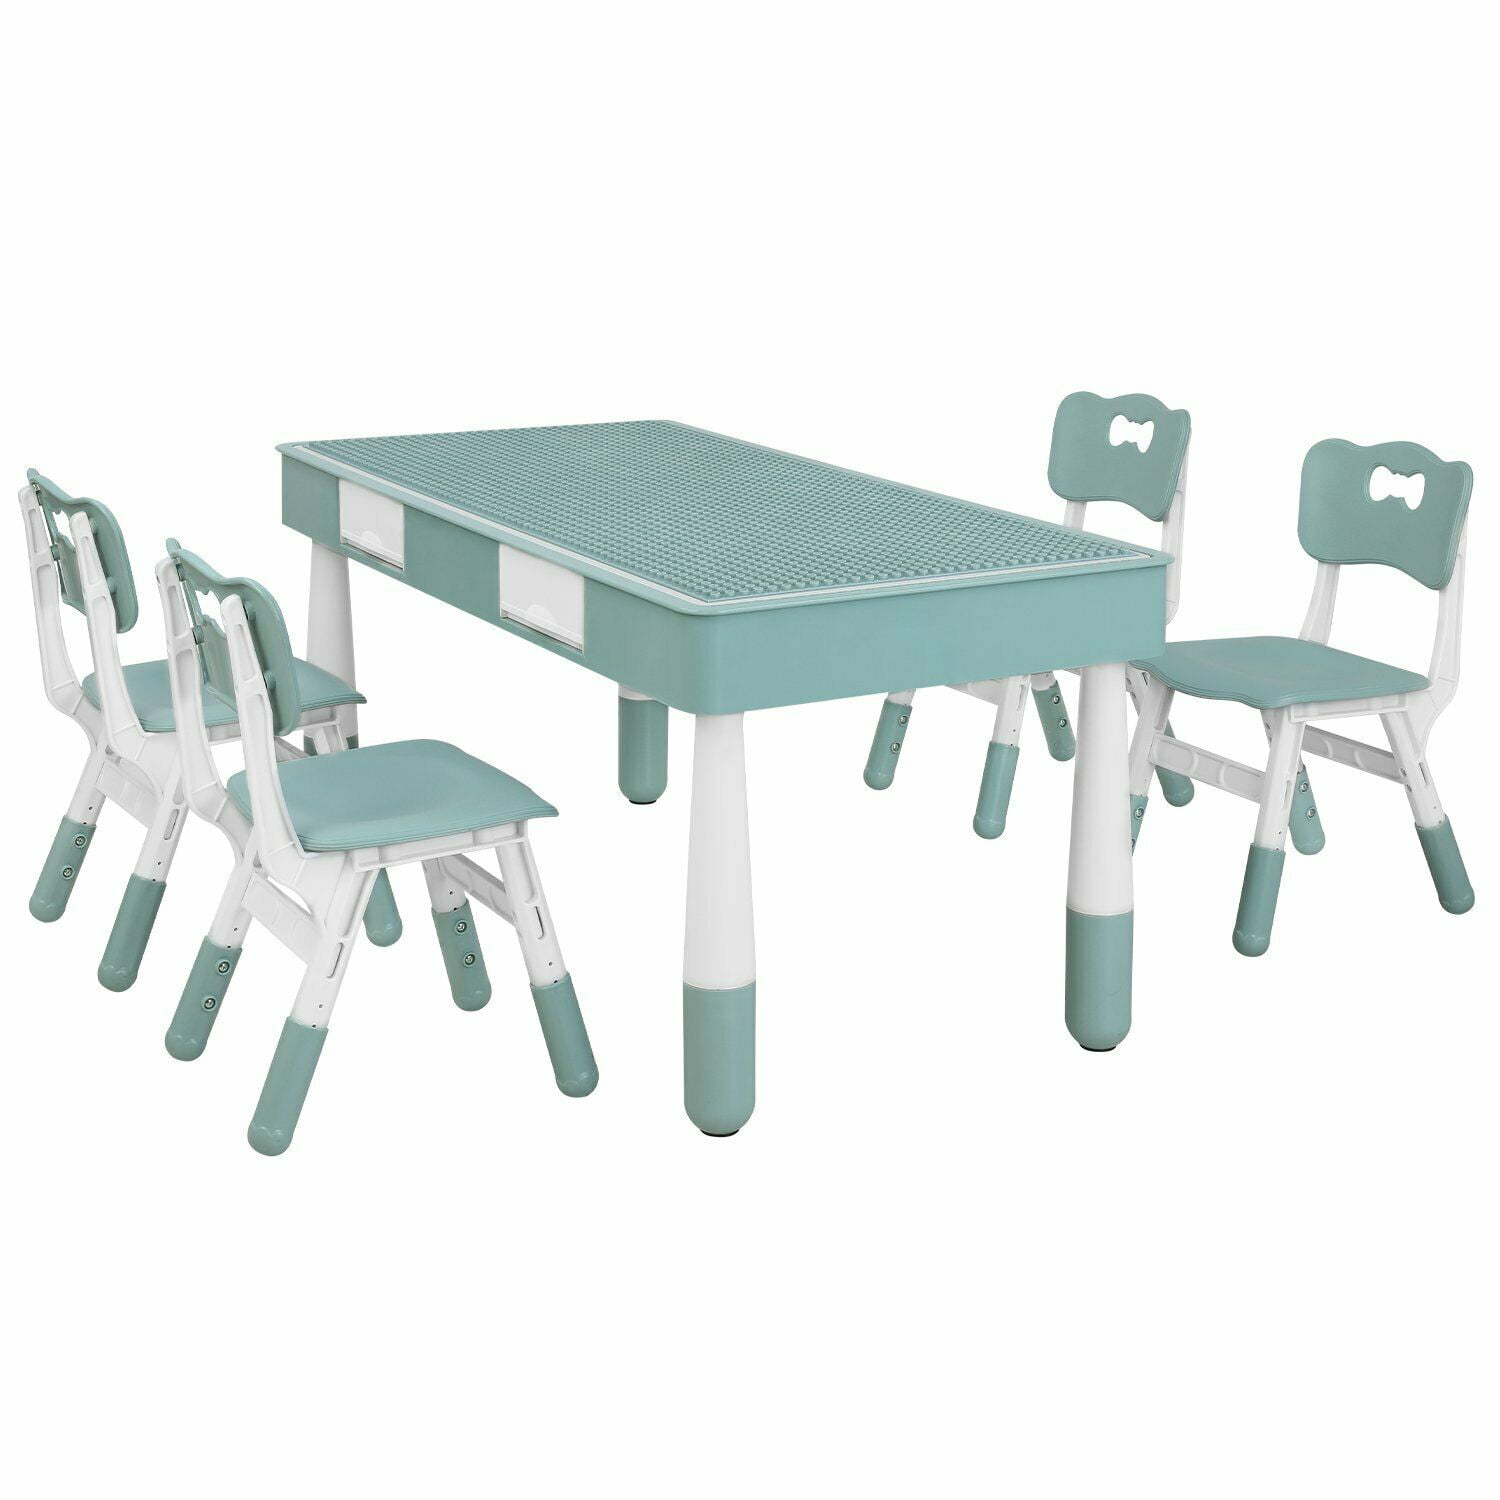 Kids Study Table and 4 Chairs Set Height Adjustable Children Play Activity Desk 